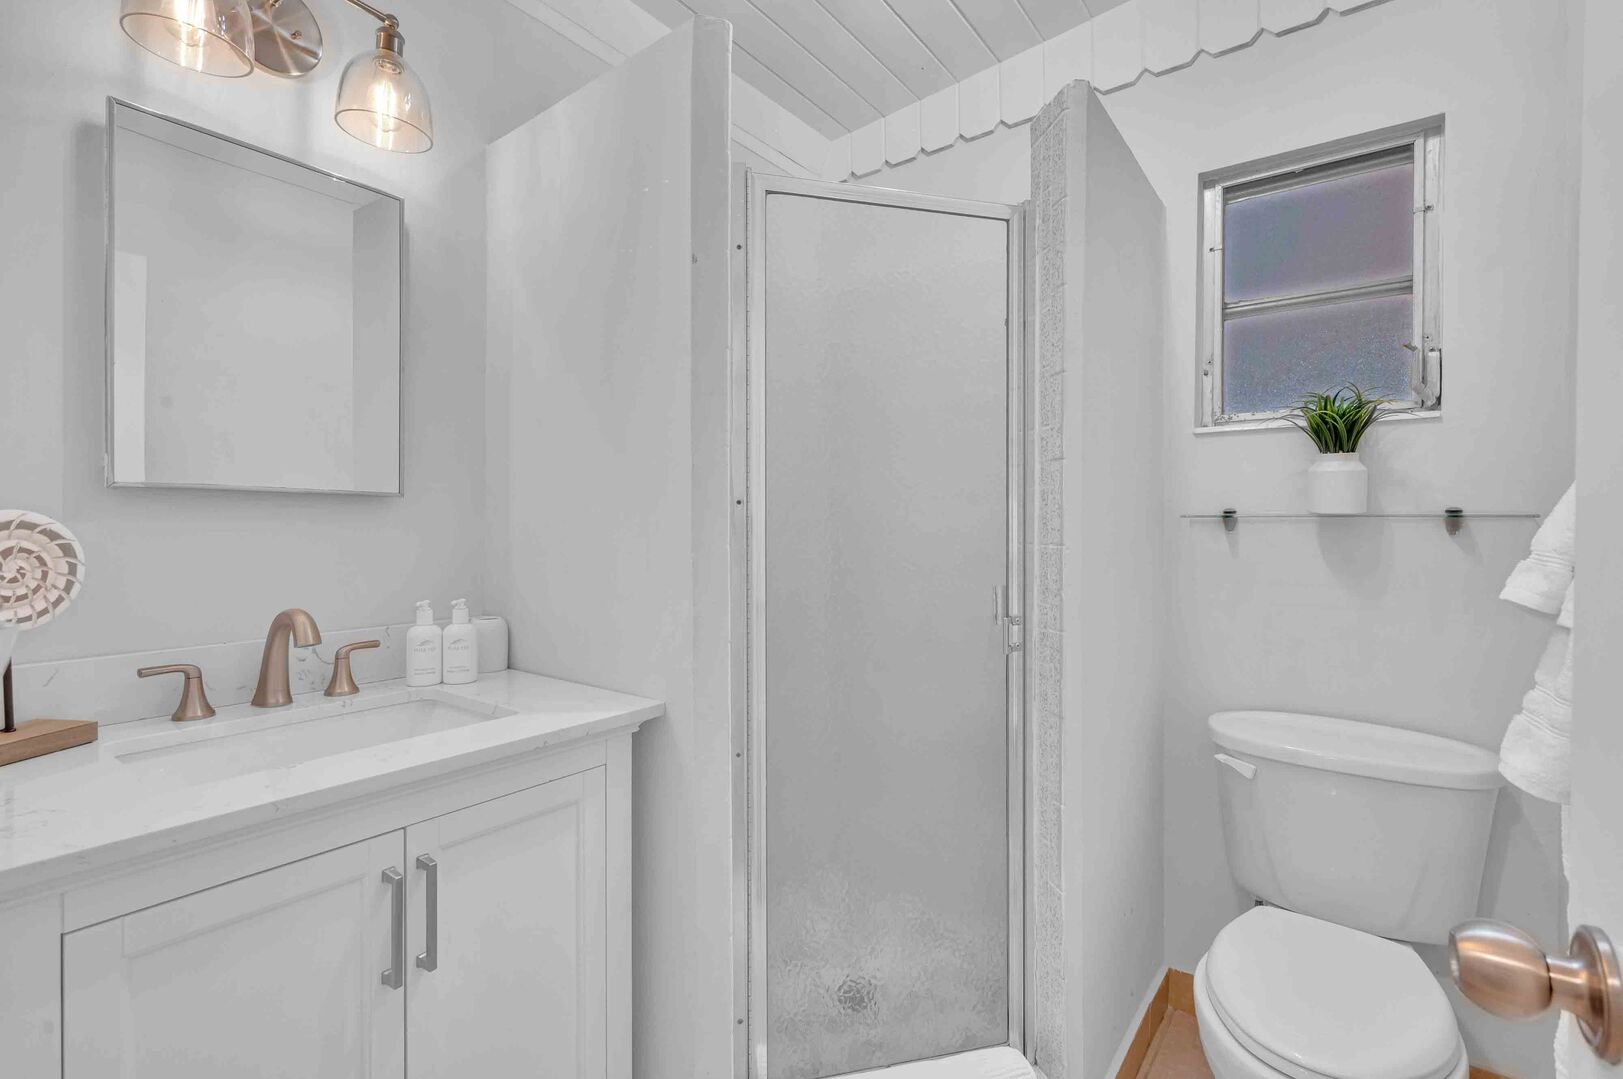 The second bedroom bath is located just outside the bedroom door and features a walk-in shower.